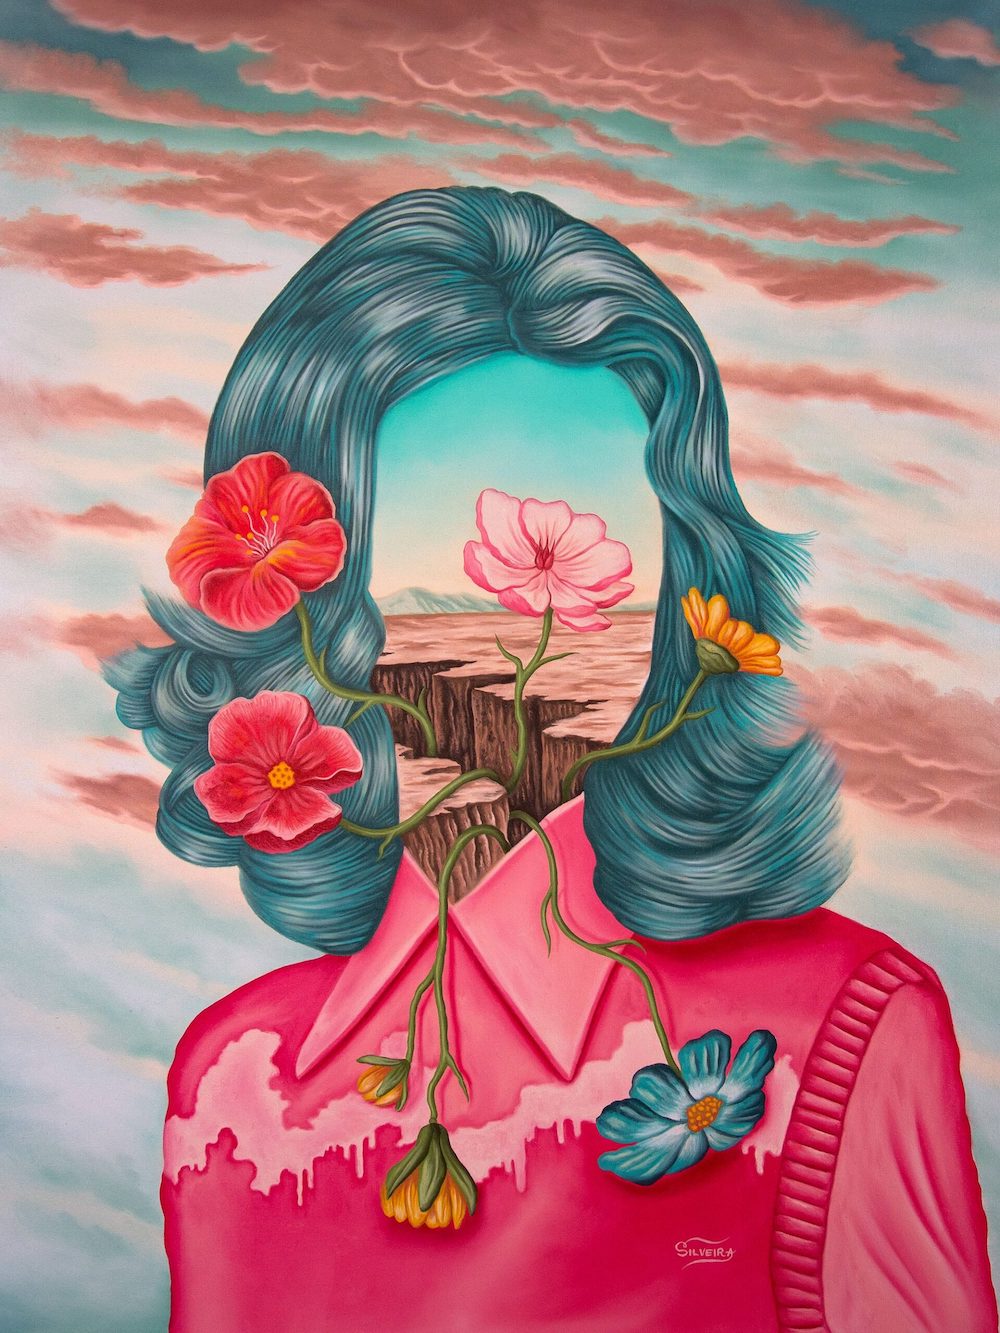 Rafael Silveira Blurs the Lines of Time in His Billowy Soft Dreamscapes Floral Painting